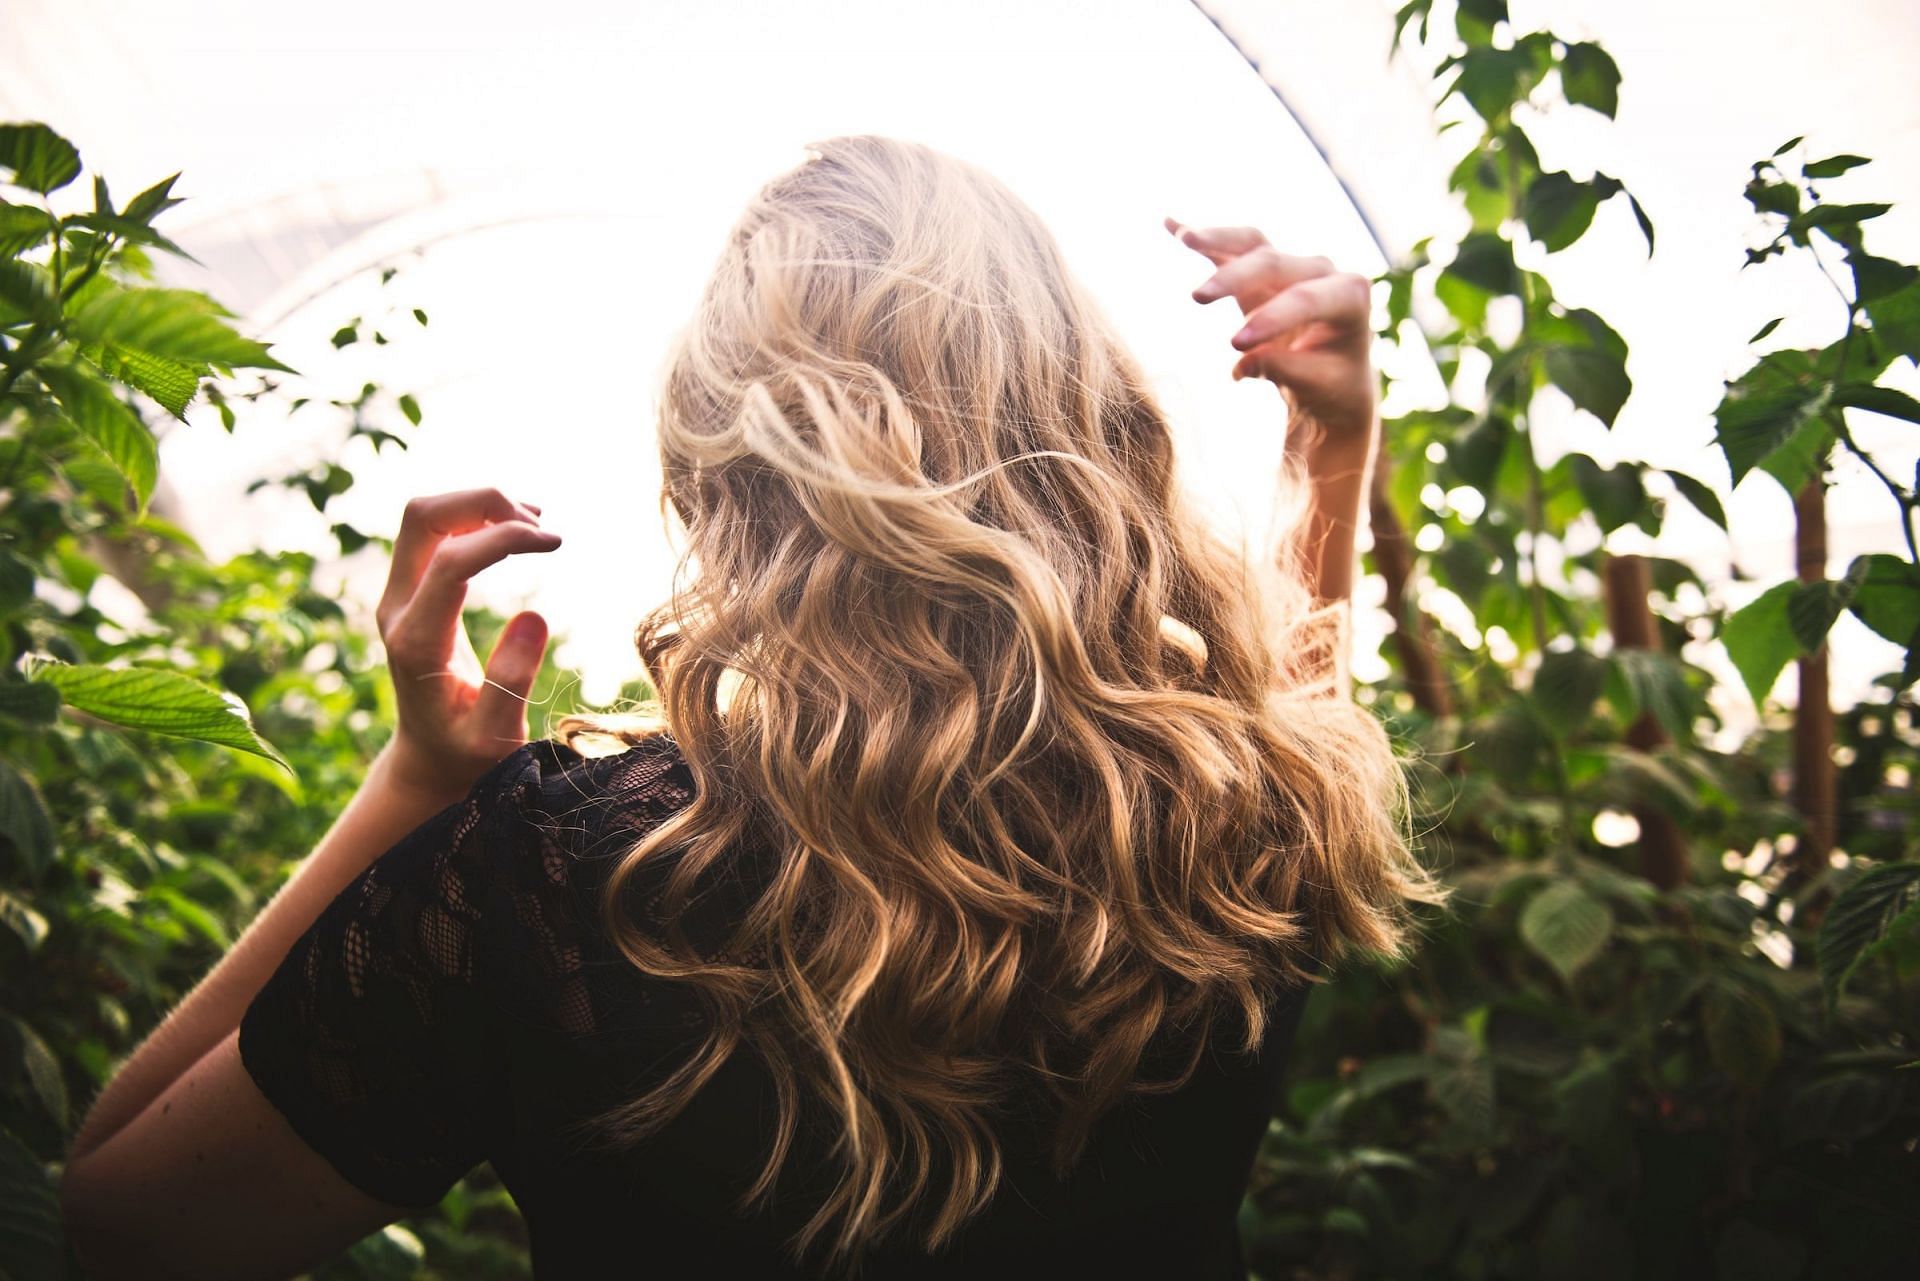 How to remove nits from hair (Image via Unsplash/Tim Mossholder)